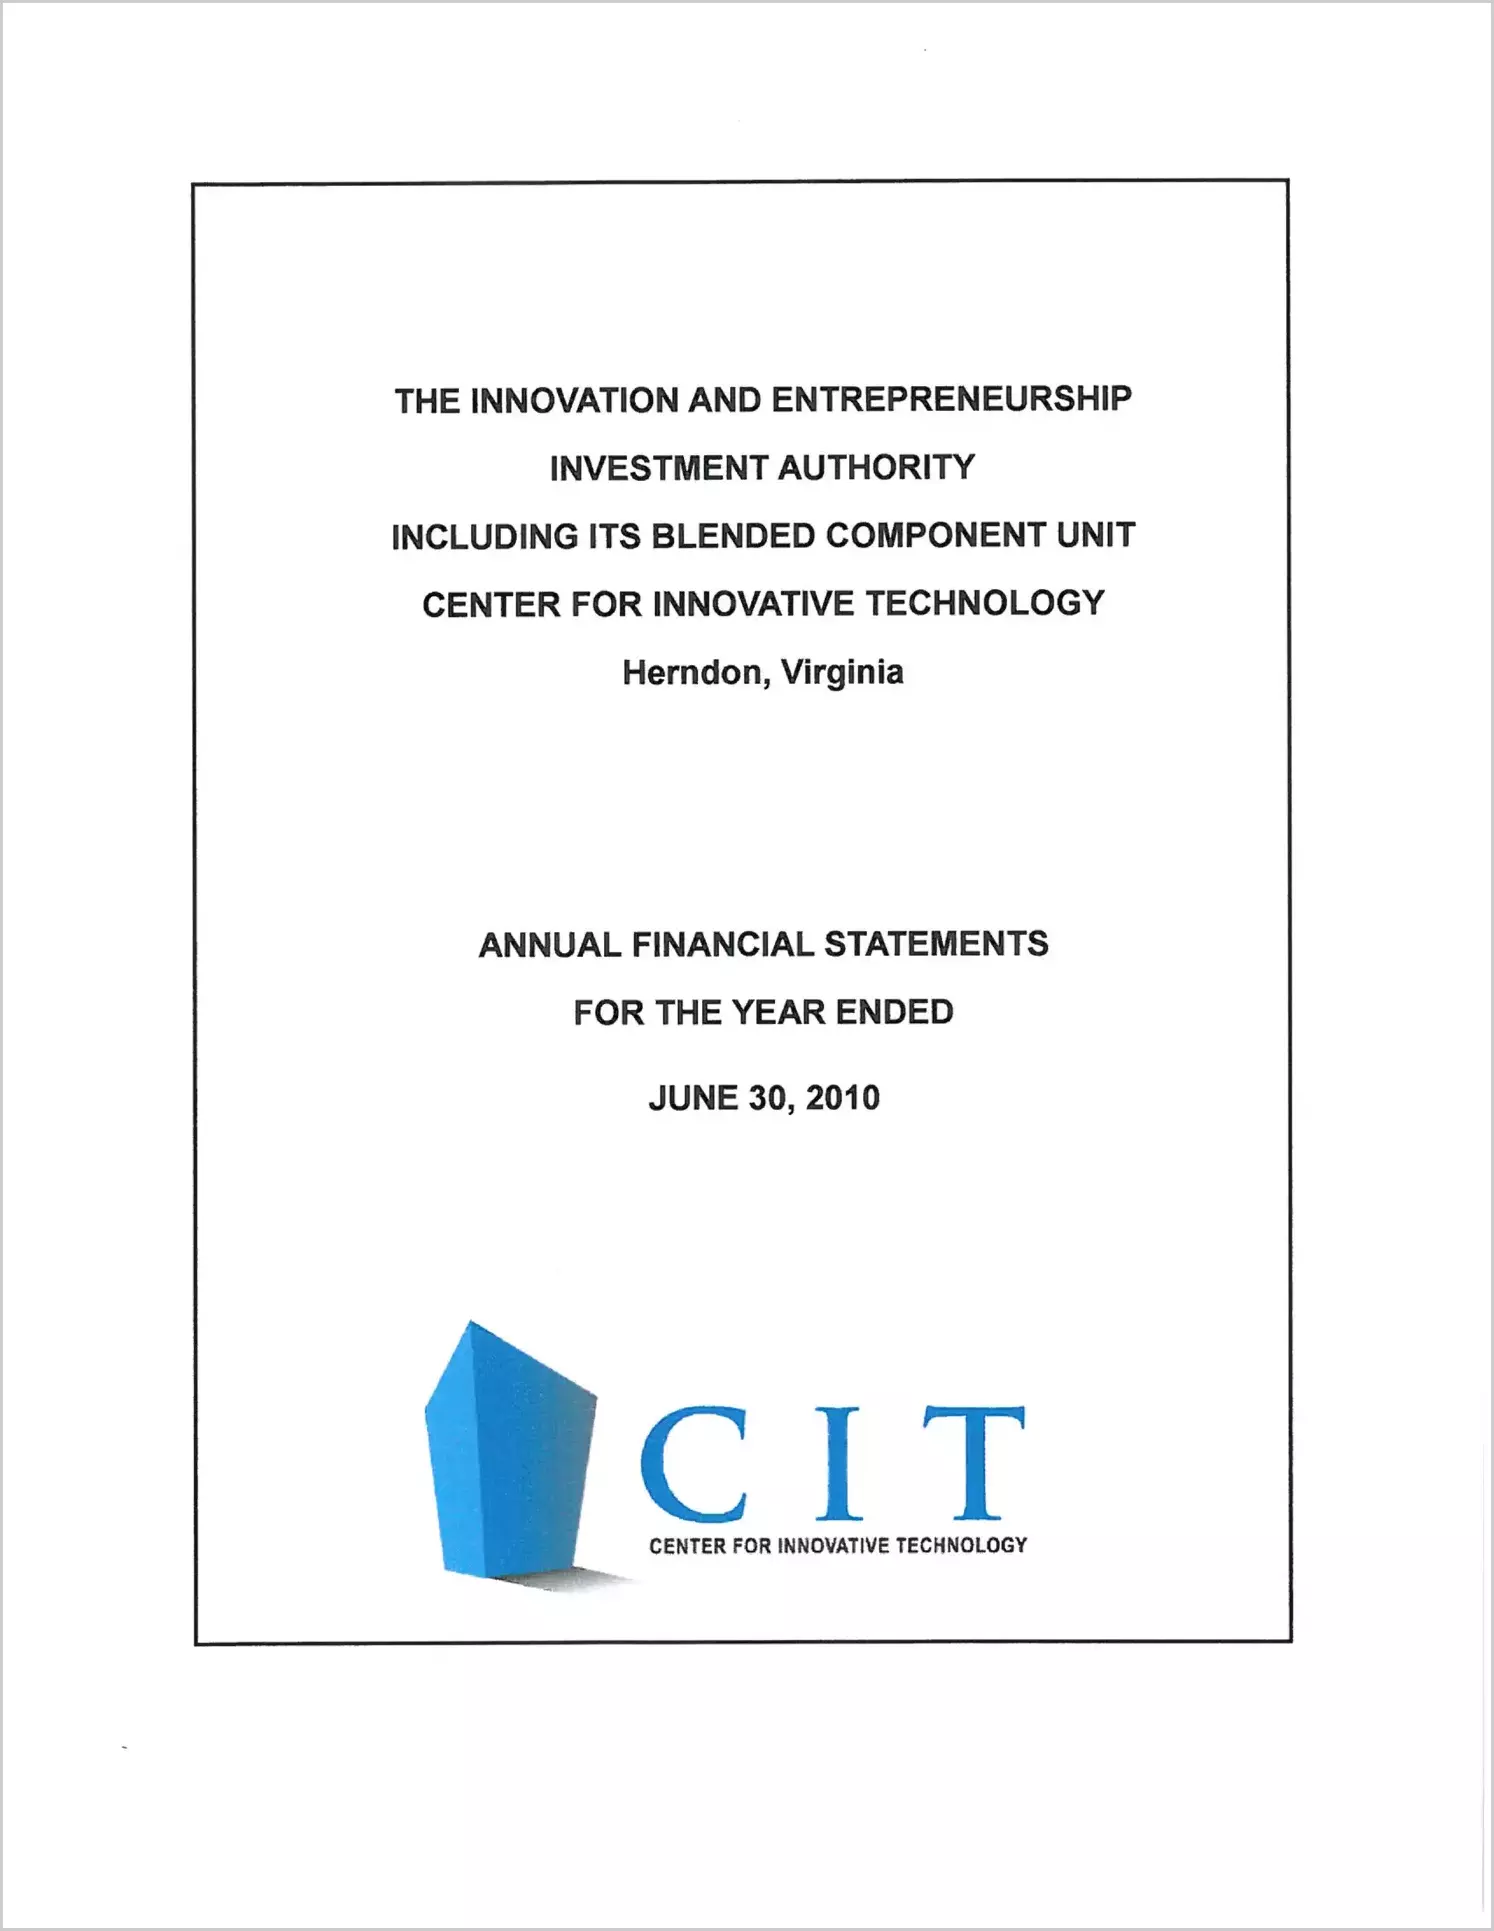 Innovative and Entrepreneurship Investment Authority Including Its Blended Component Unit Center for Innovative Technology  Financial Statement Report for the year ended June 30, 2010